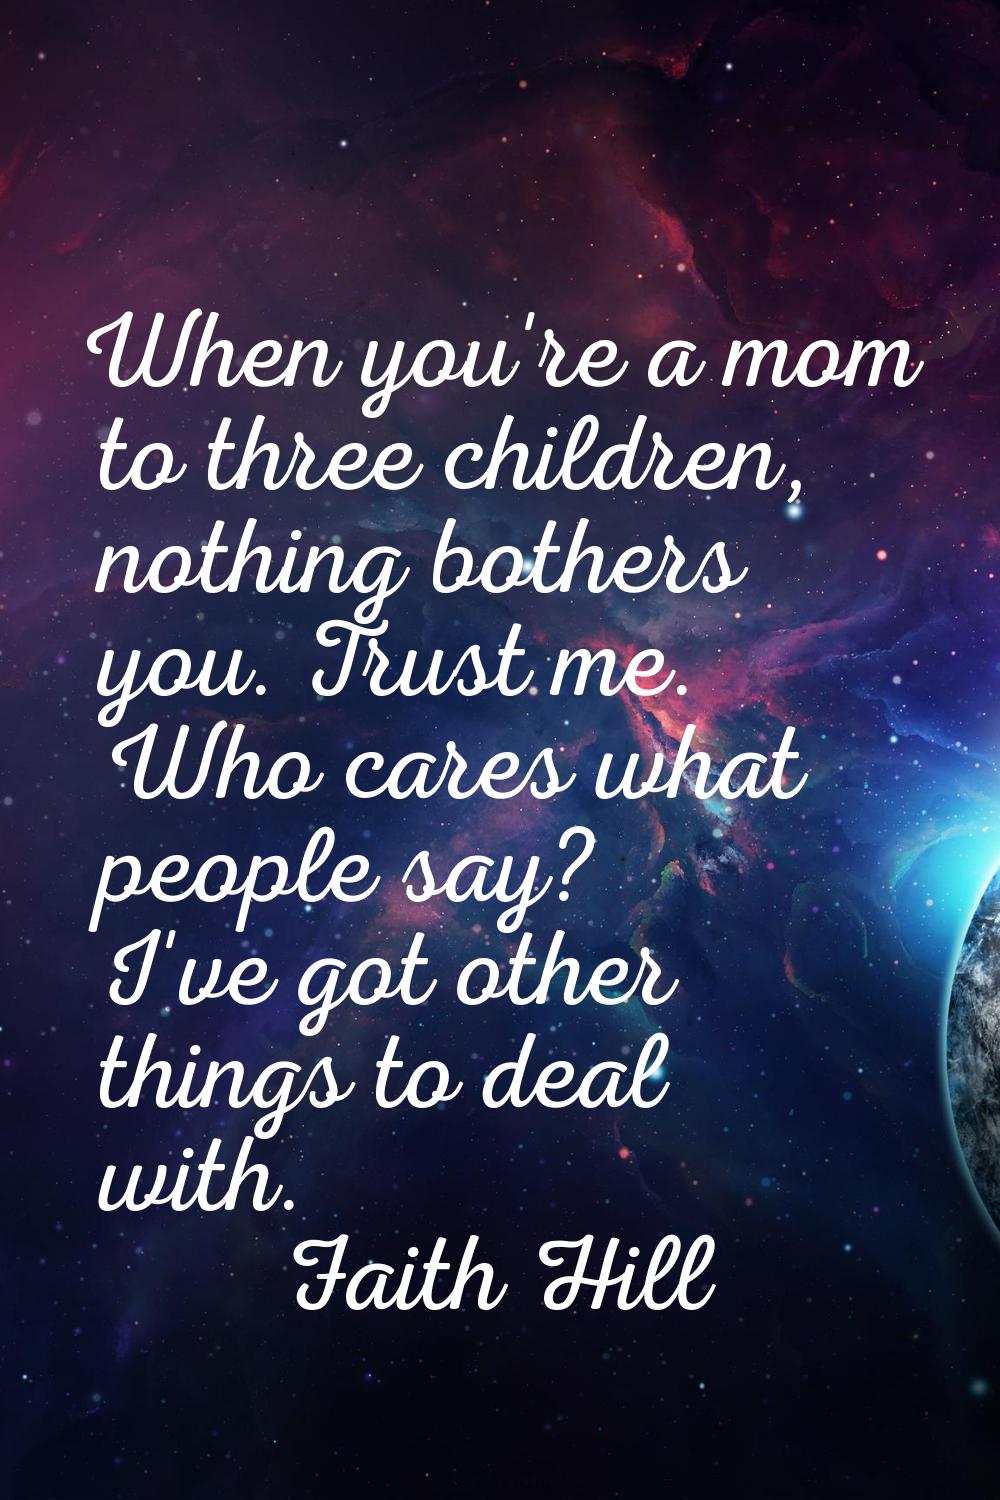 When you're a mom to three children, nothing bothers you. Trust me. Who cares what people say? I've